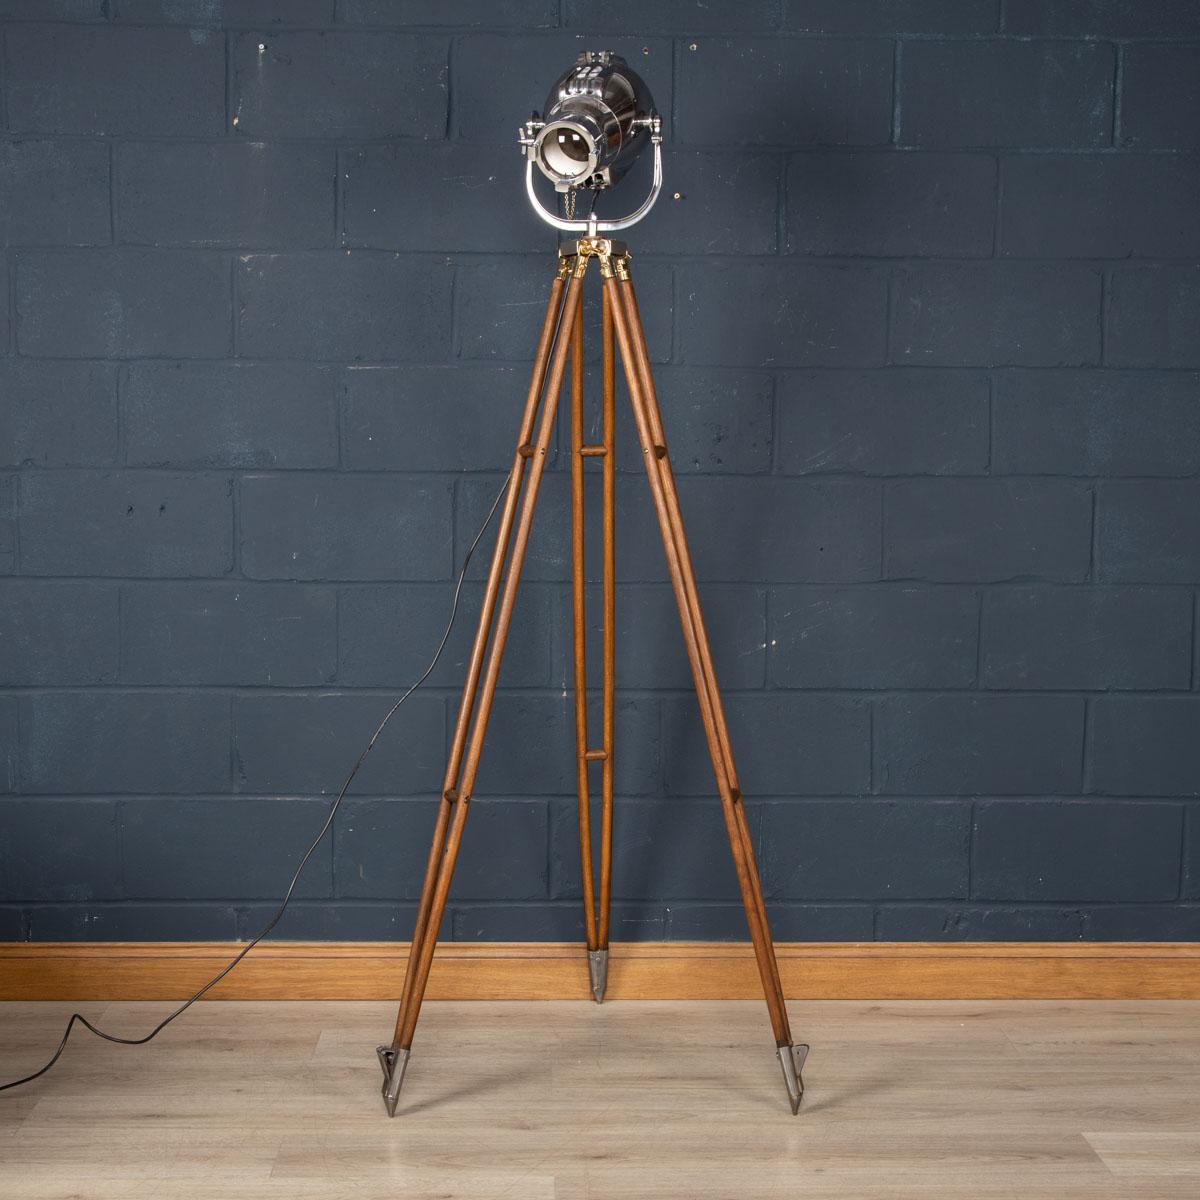 One of the most elegant lighting solutions available on the market, this mid 20th century theatre lamp made by 